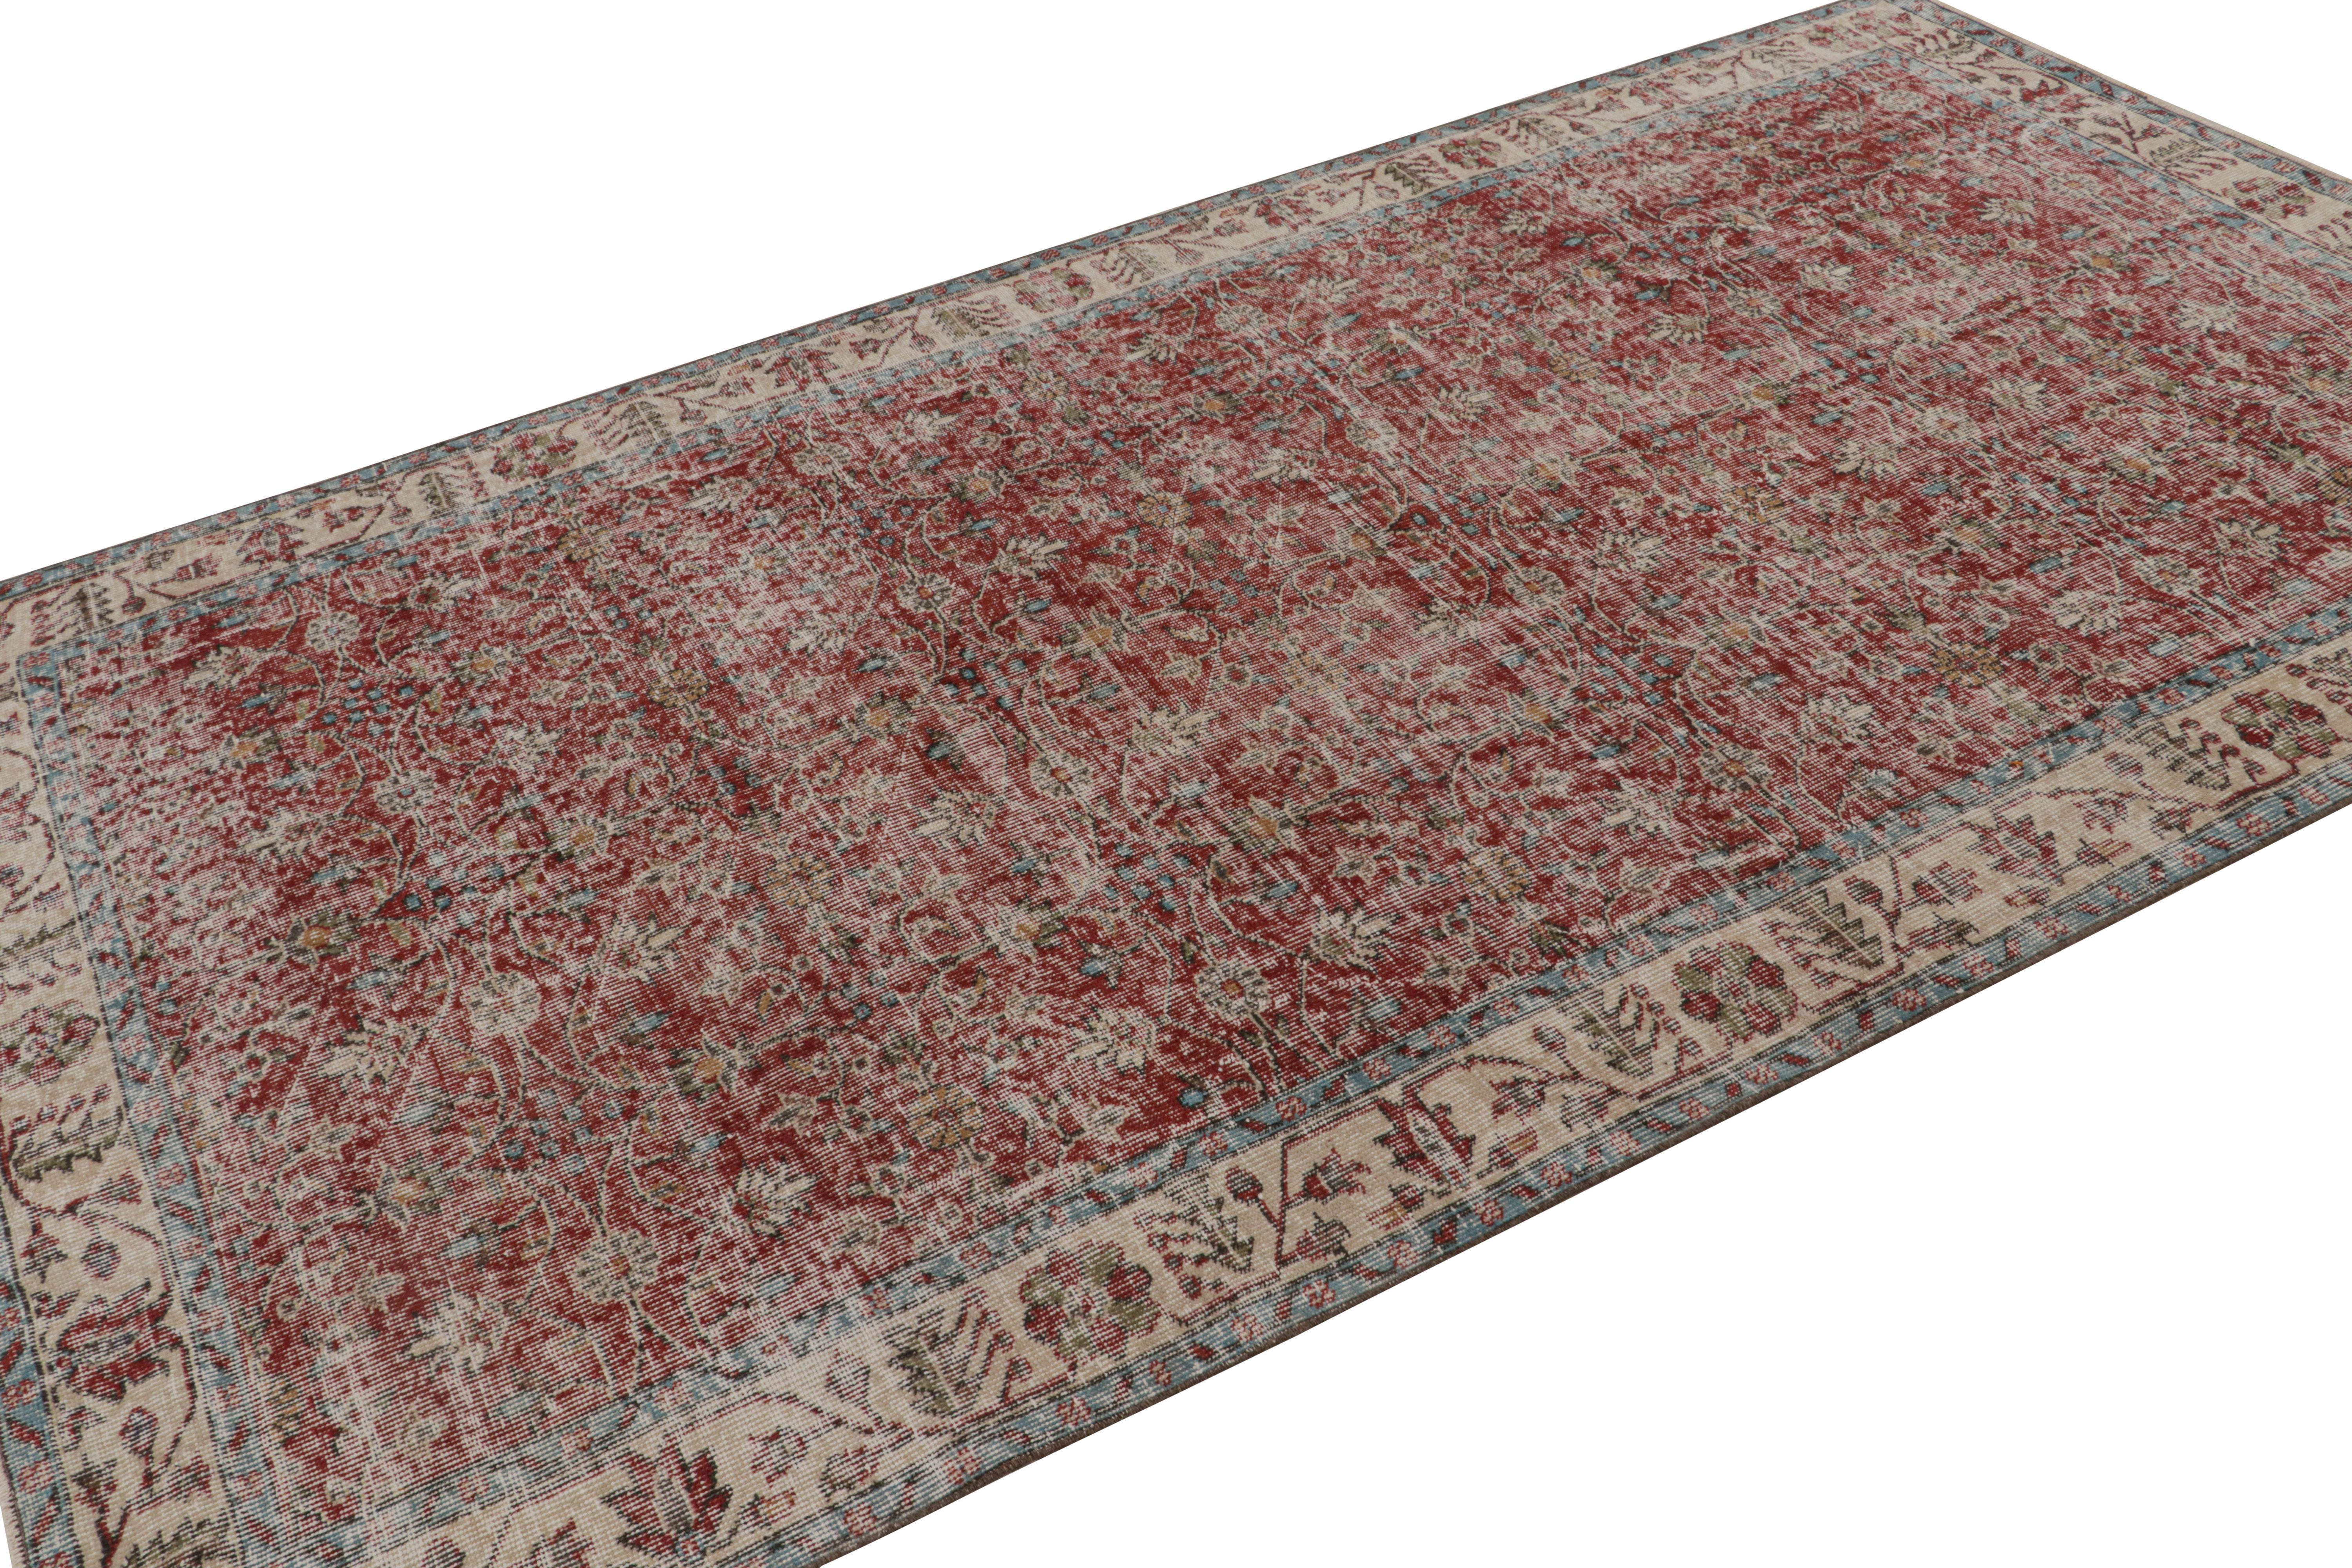 Handknotted in wool, this 5x10 vintage rug originates from Turkey, circa 1960-1970, and is believed to be among the works of mid-century designer Zeki Múren. 

On the Design:

Connoisseurs will admire this vintage Zeki Múren’s design which explores